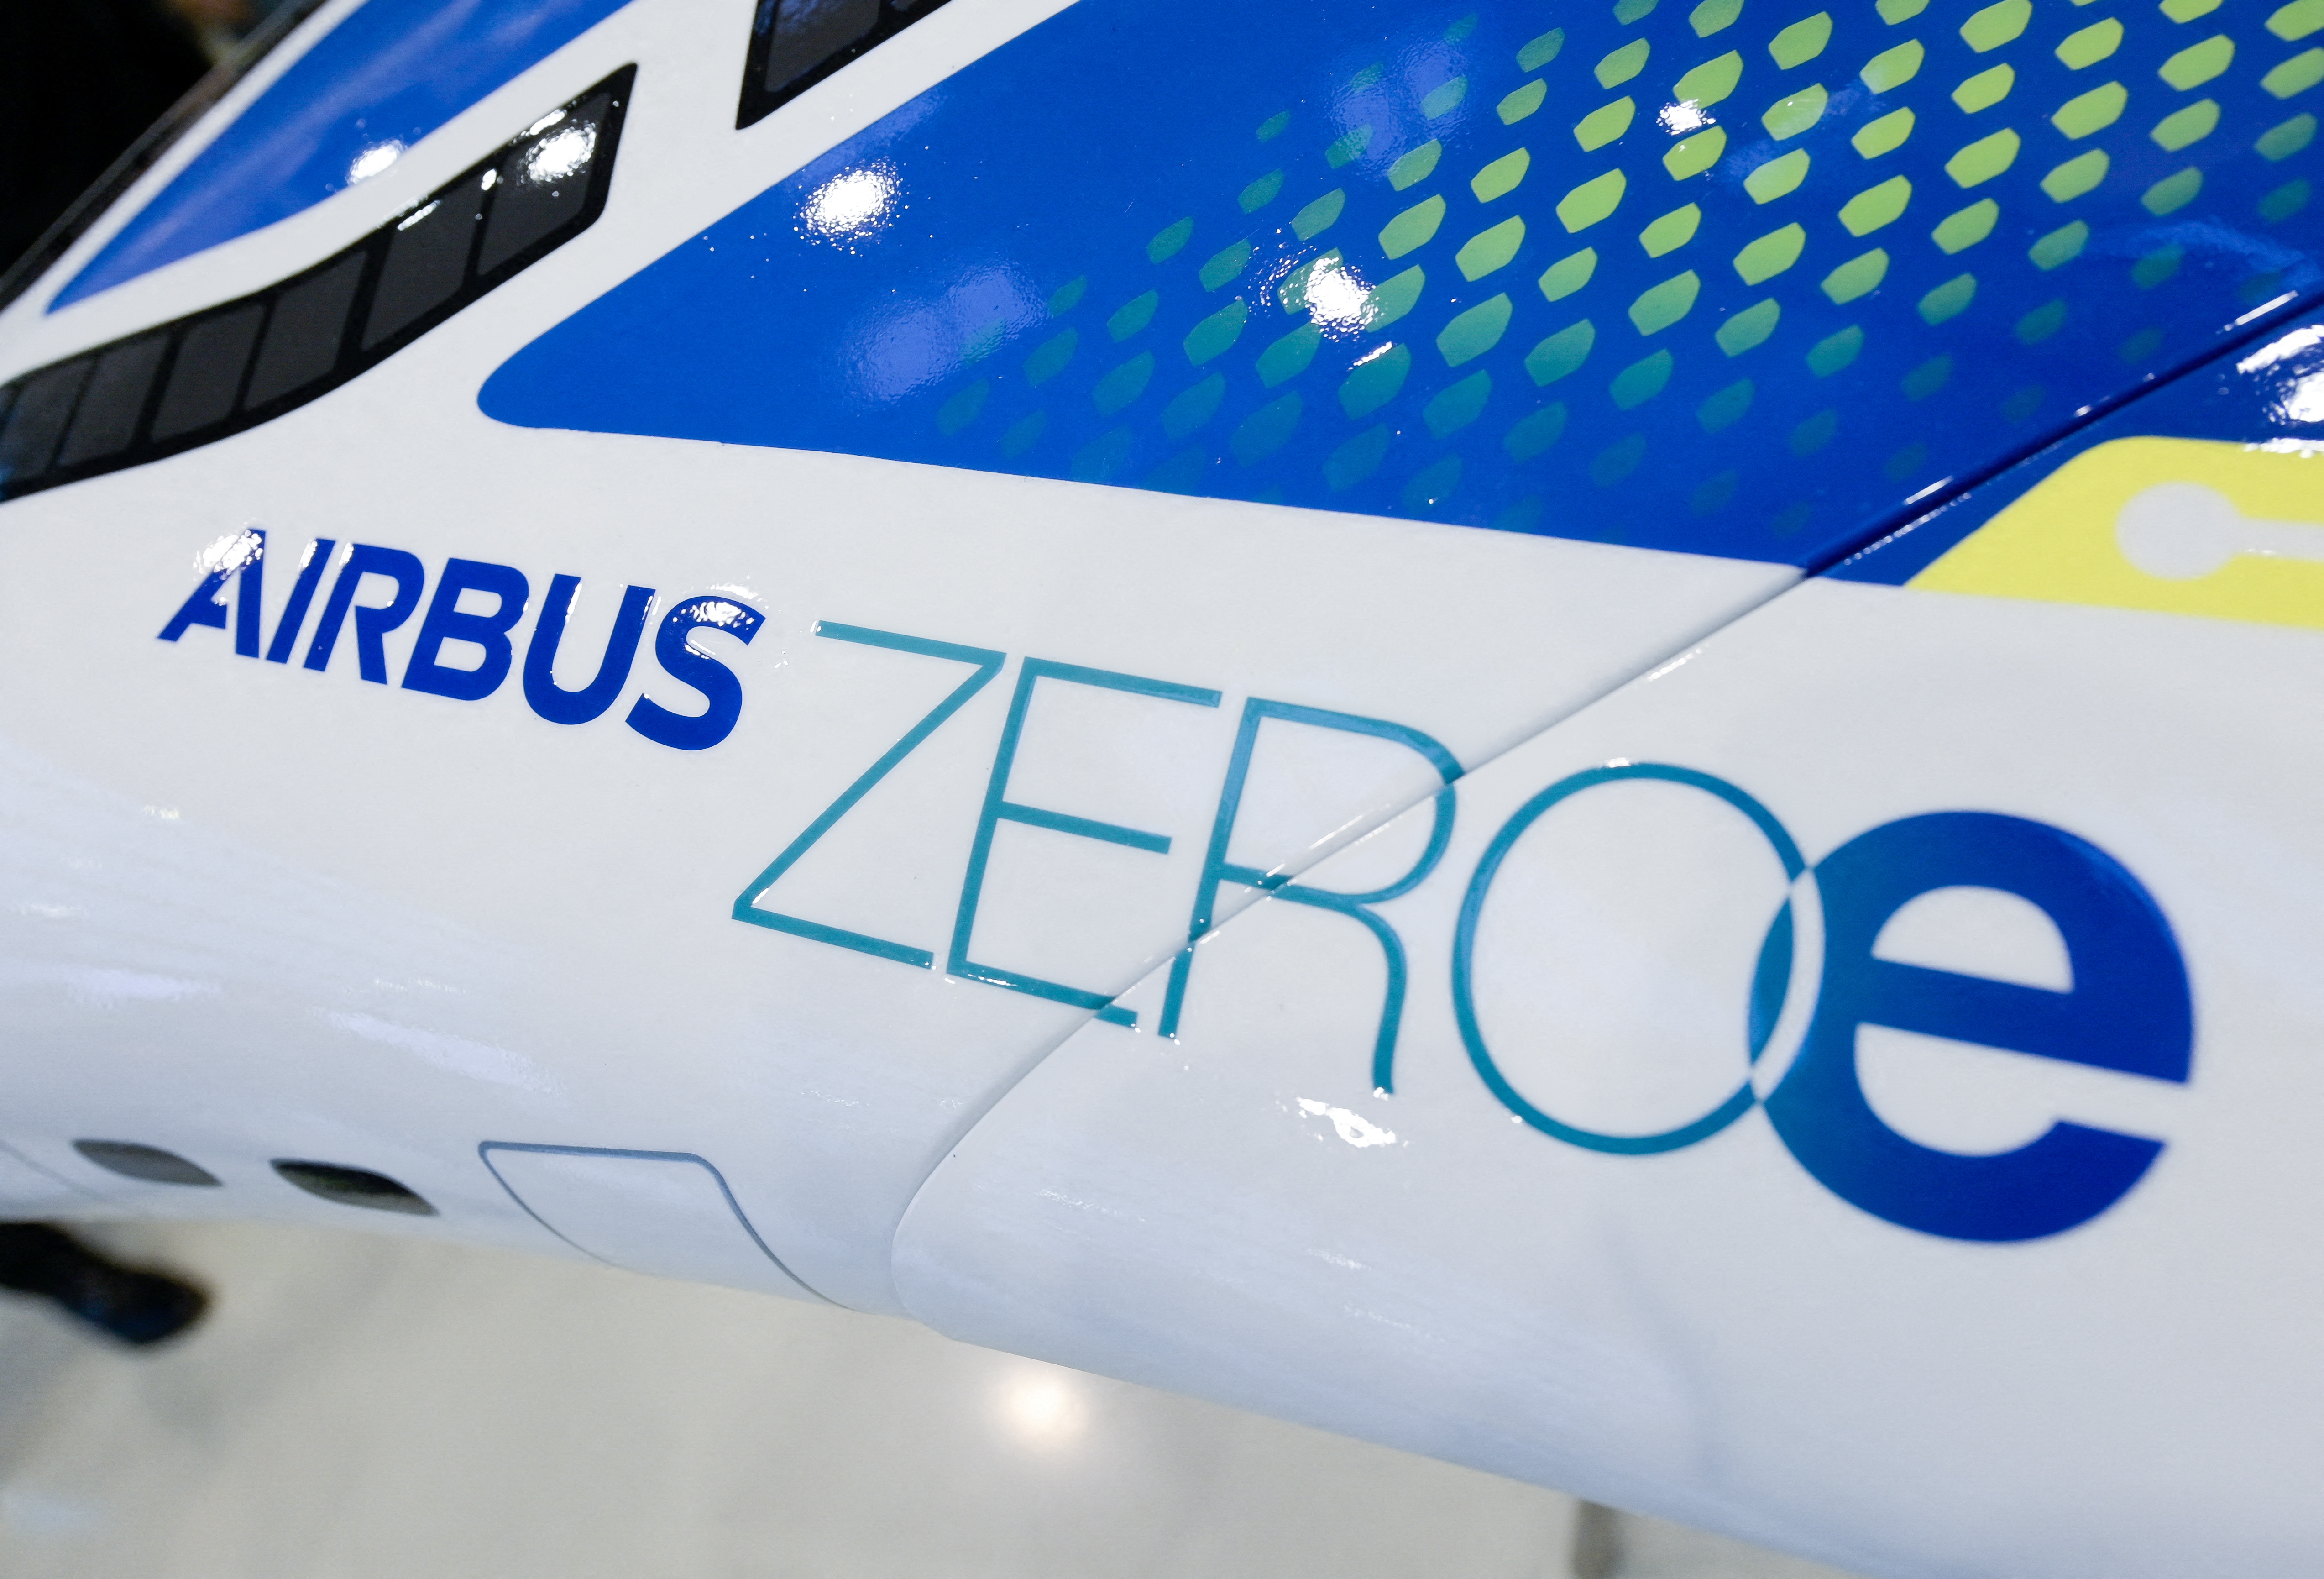 German Economy and Climate Protection Minister Habeck visits Airbus facilities in Hamburg